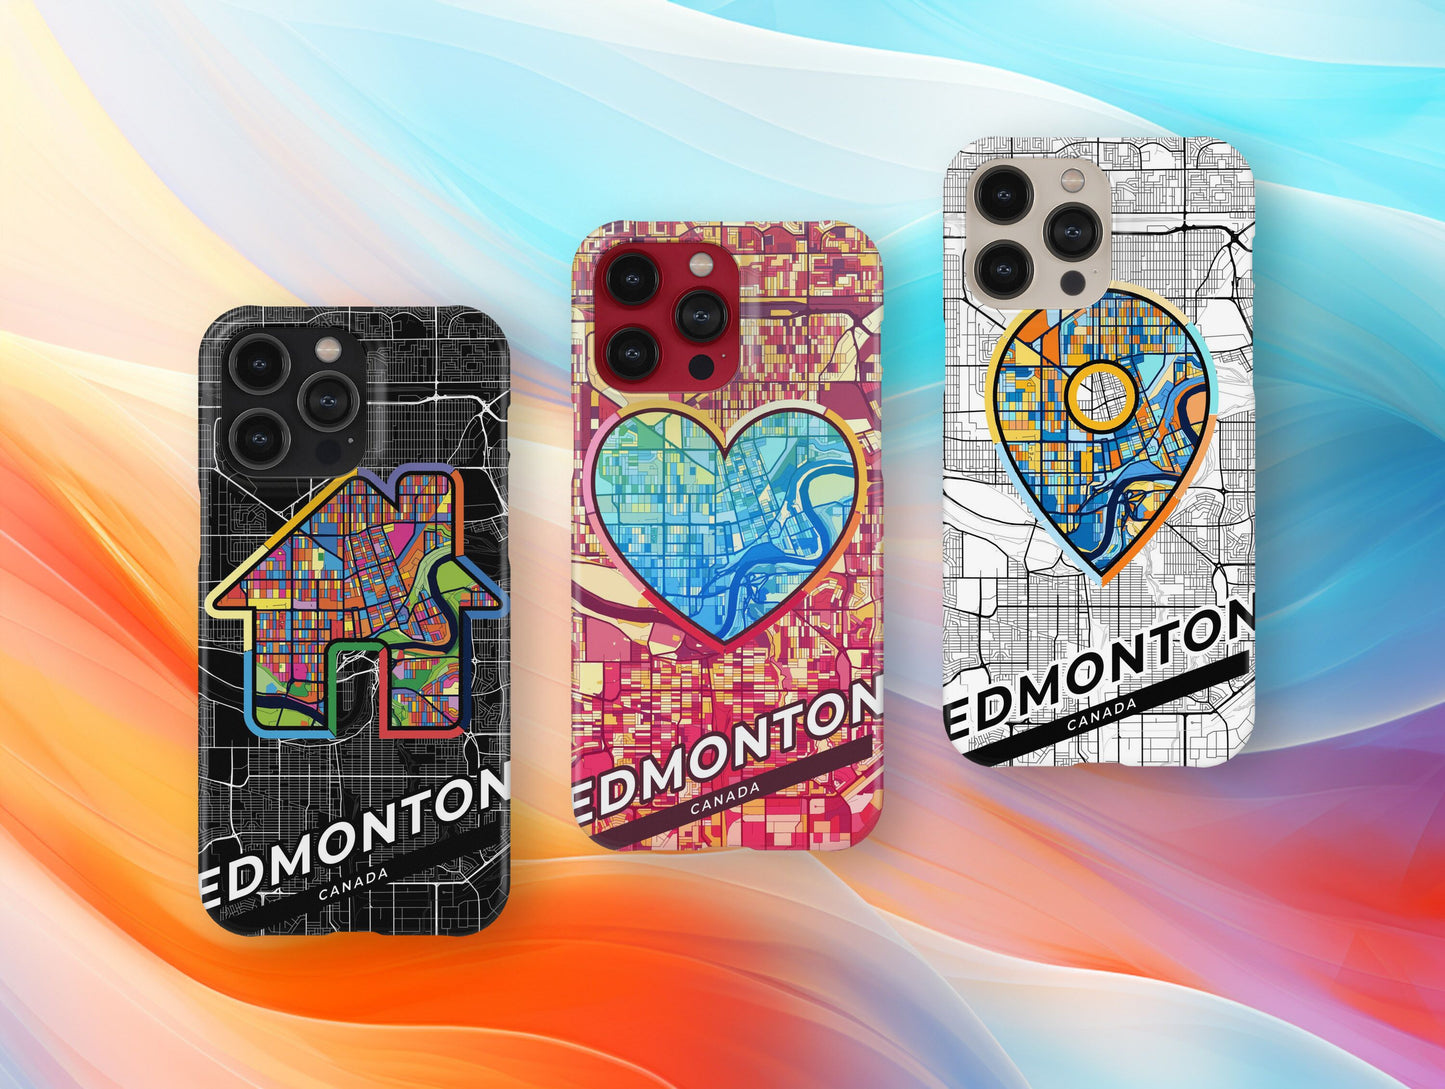 Edmonton Canada slim phone case with colorful icon. Birthday, wedding or housewarming gift. Couple match cases.